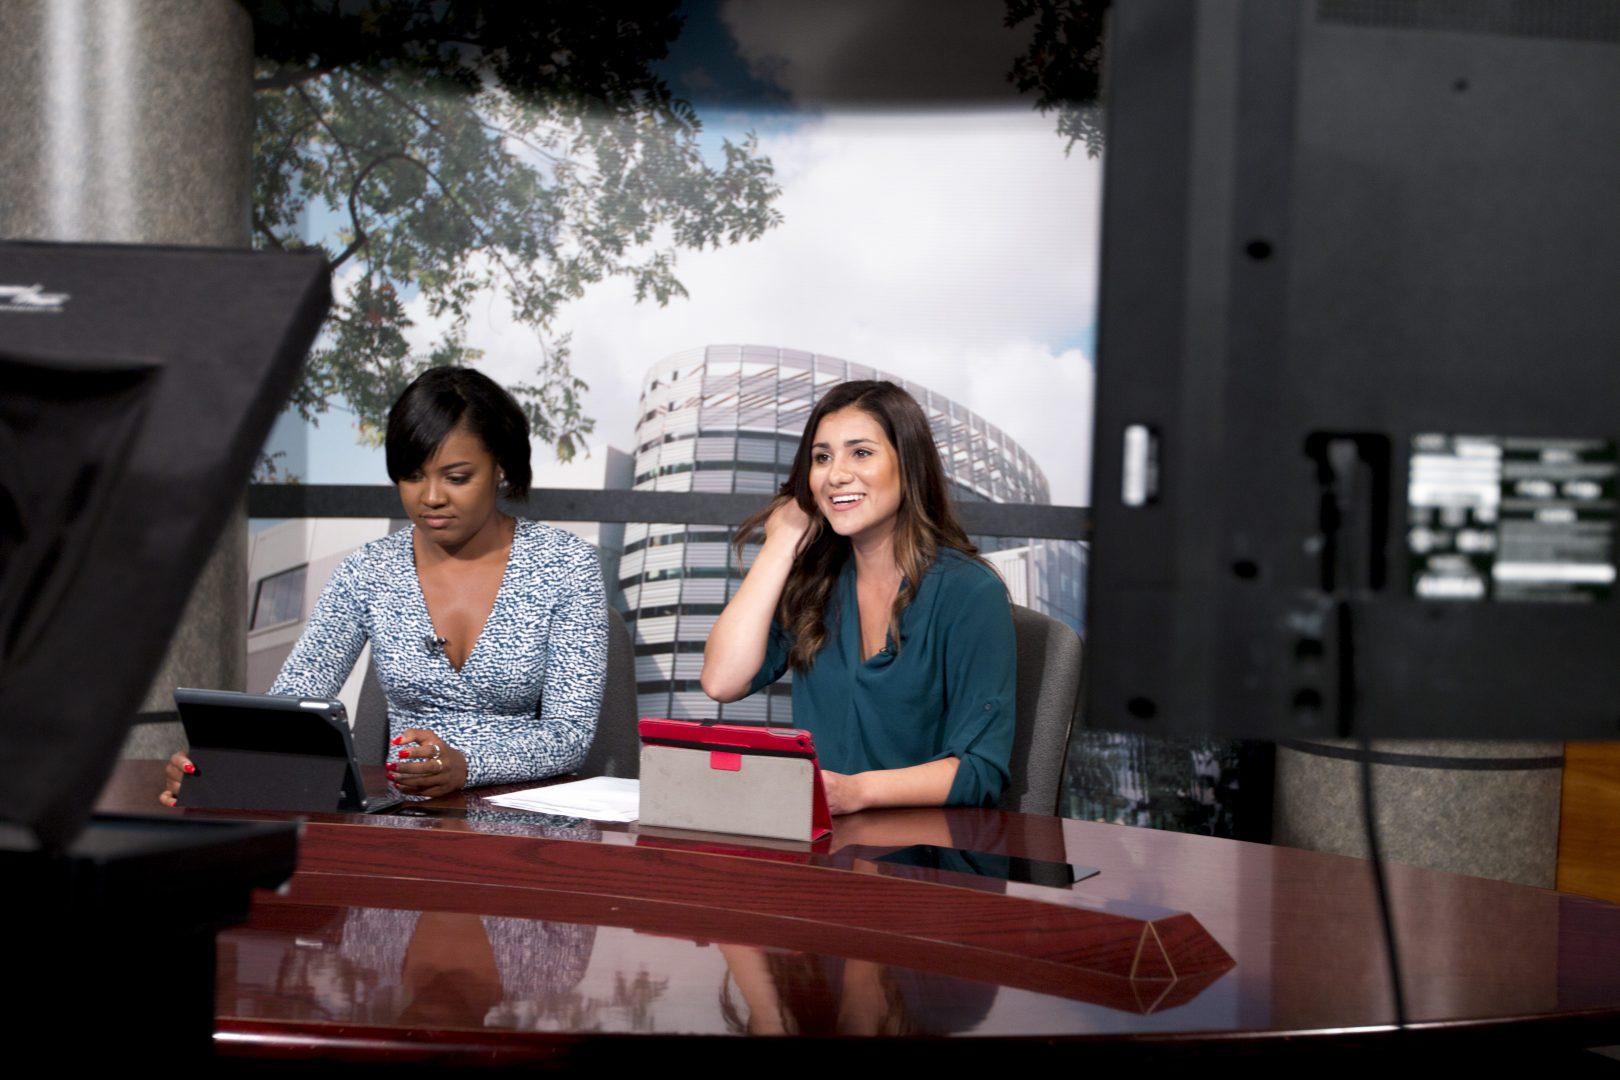 Broadcast students Deja Wright and Vanessa Romo finish their broadcast during the Global News Relay on April 23, 2018.